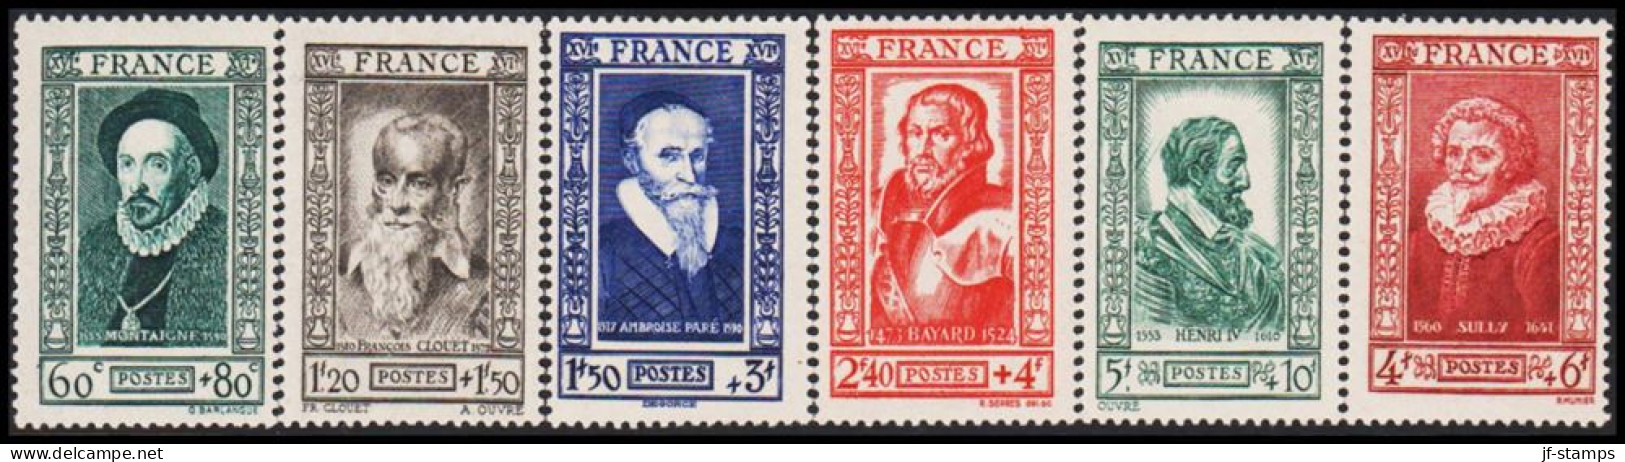 1943. REP. FRANCAISE. National Aid Complete Set. Hinged.  (Michel 600-605) - JF544930 - Unused Stamps